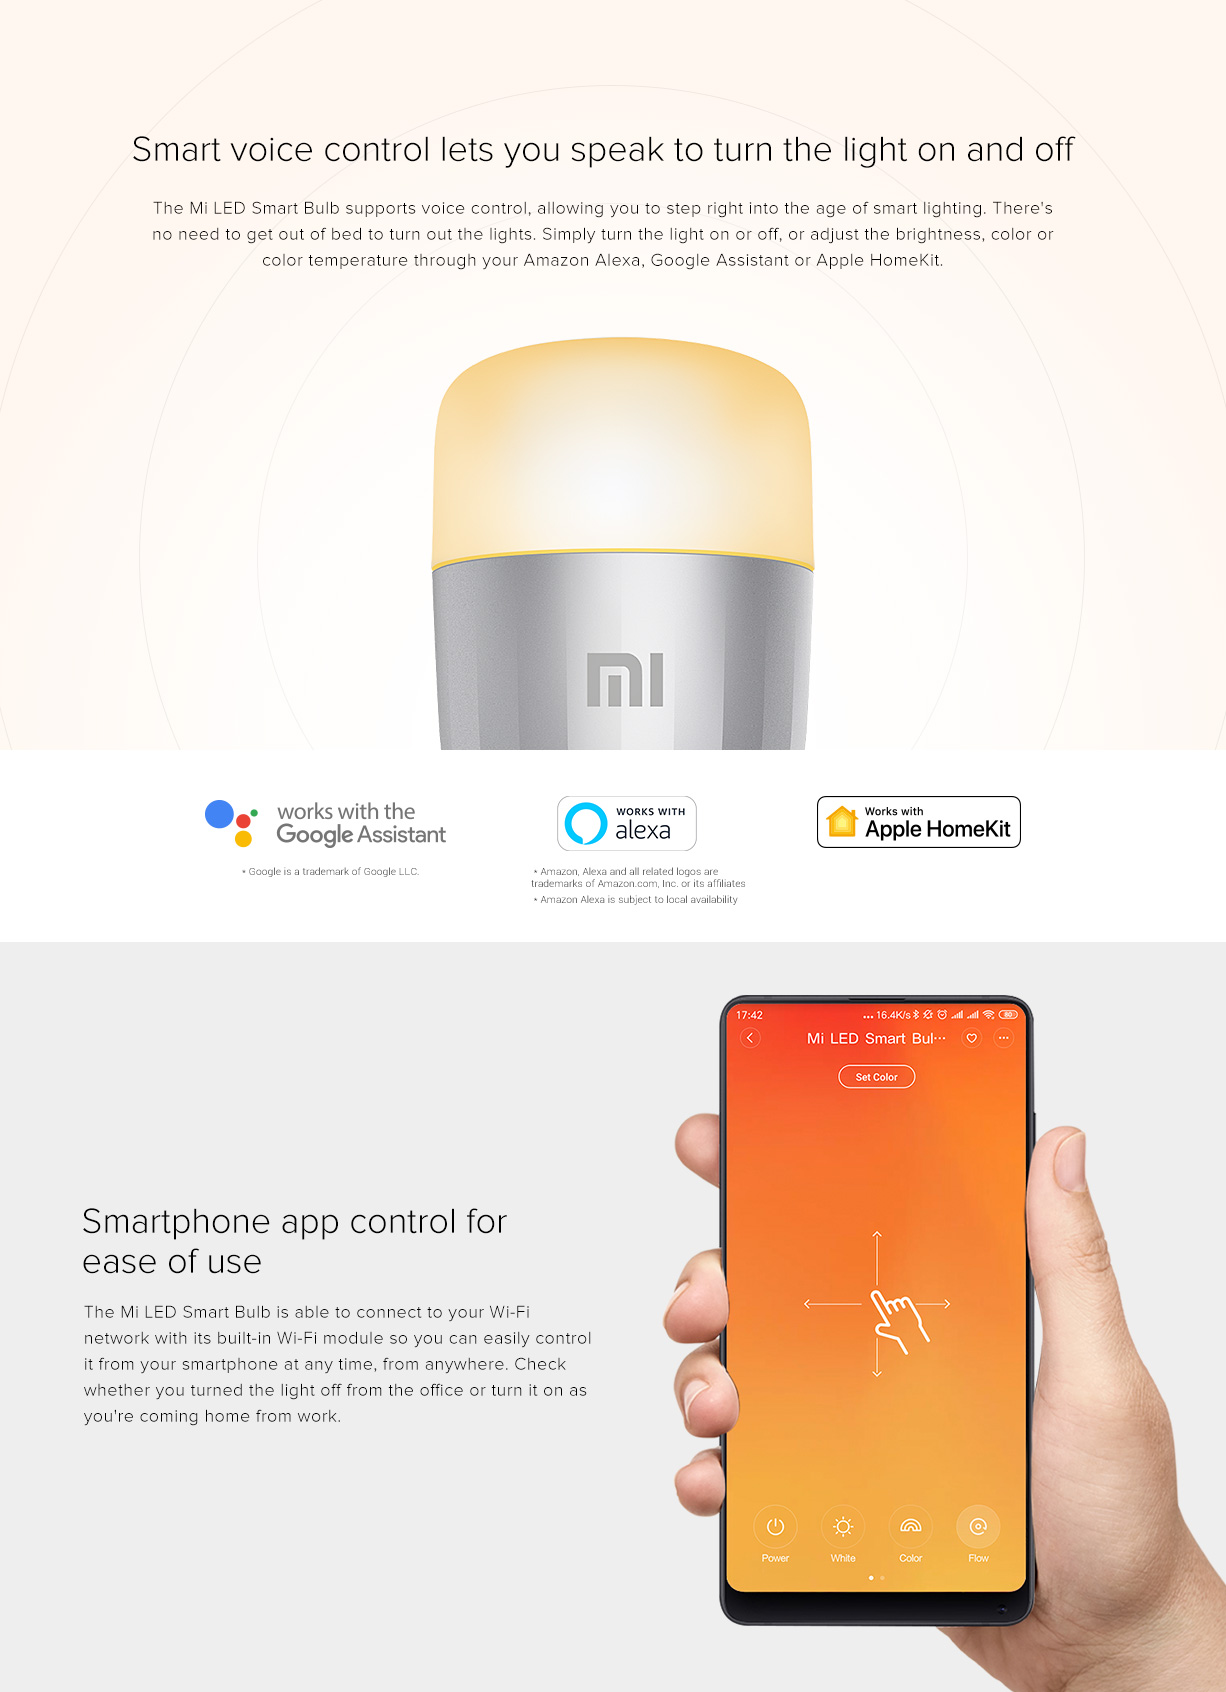 Mi Led Smart Bulb Pc 1226 03 Xiaomi Xiaomi Mi Smart Led Bulb Essential(White And Color) Wifi Remote Control Smart Light Work With Alexa And Google Assistant, Voice Control, Wifi Connection, Adjustable Color Temperature, Scheduled On/Off, Smart App Control Xiaomi Mi Led Xiaomi Mi Led Smart Bulb Essential Bulb (White And Color)(10W)